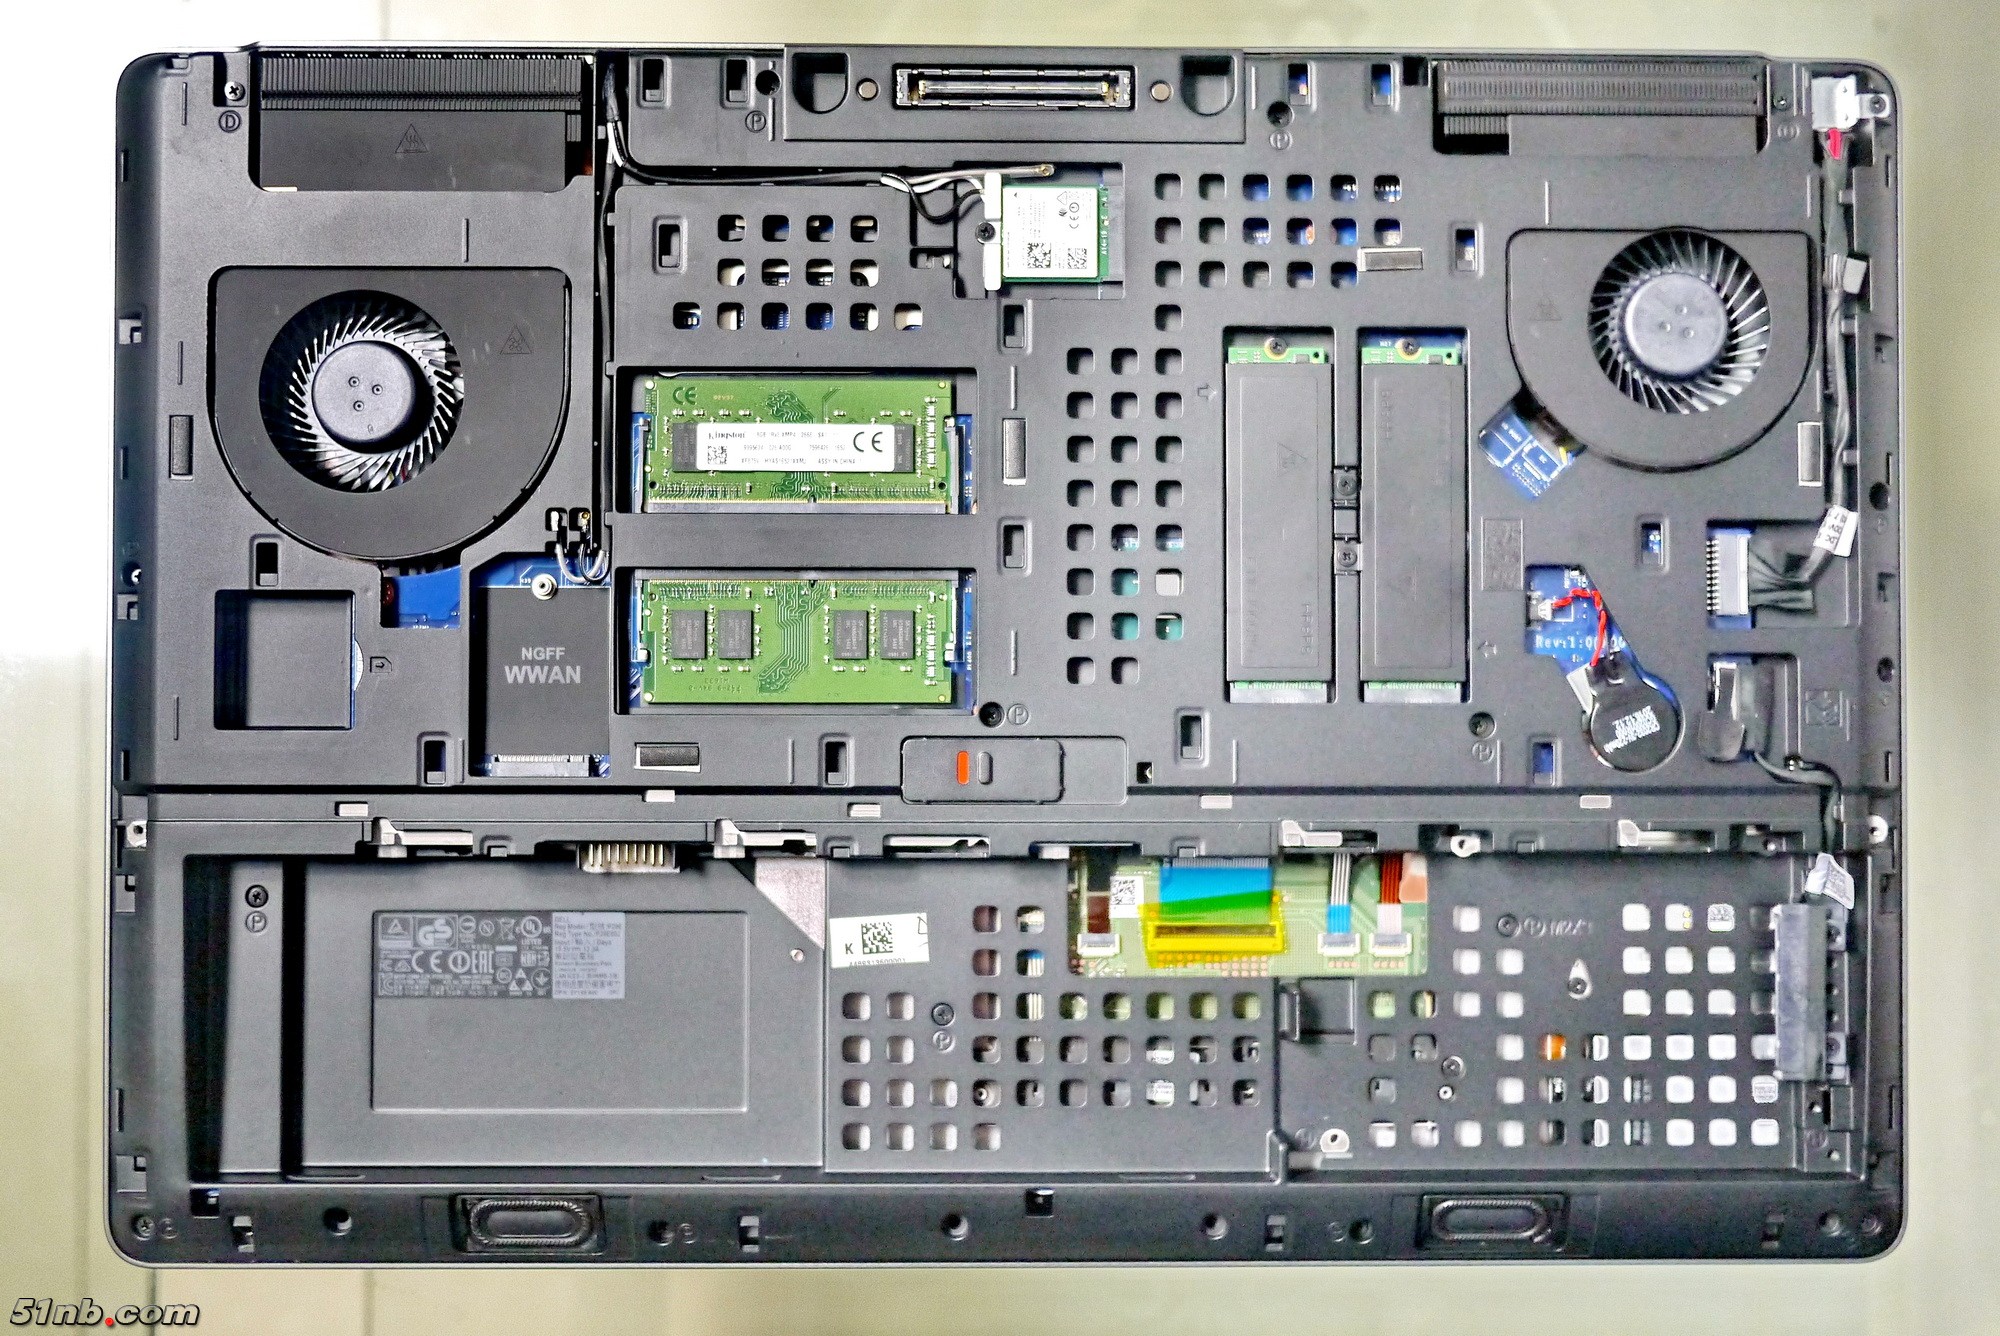 Dell Precision 7720 Disassembly and SSD, RAM Upgrade Guide